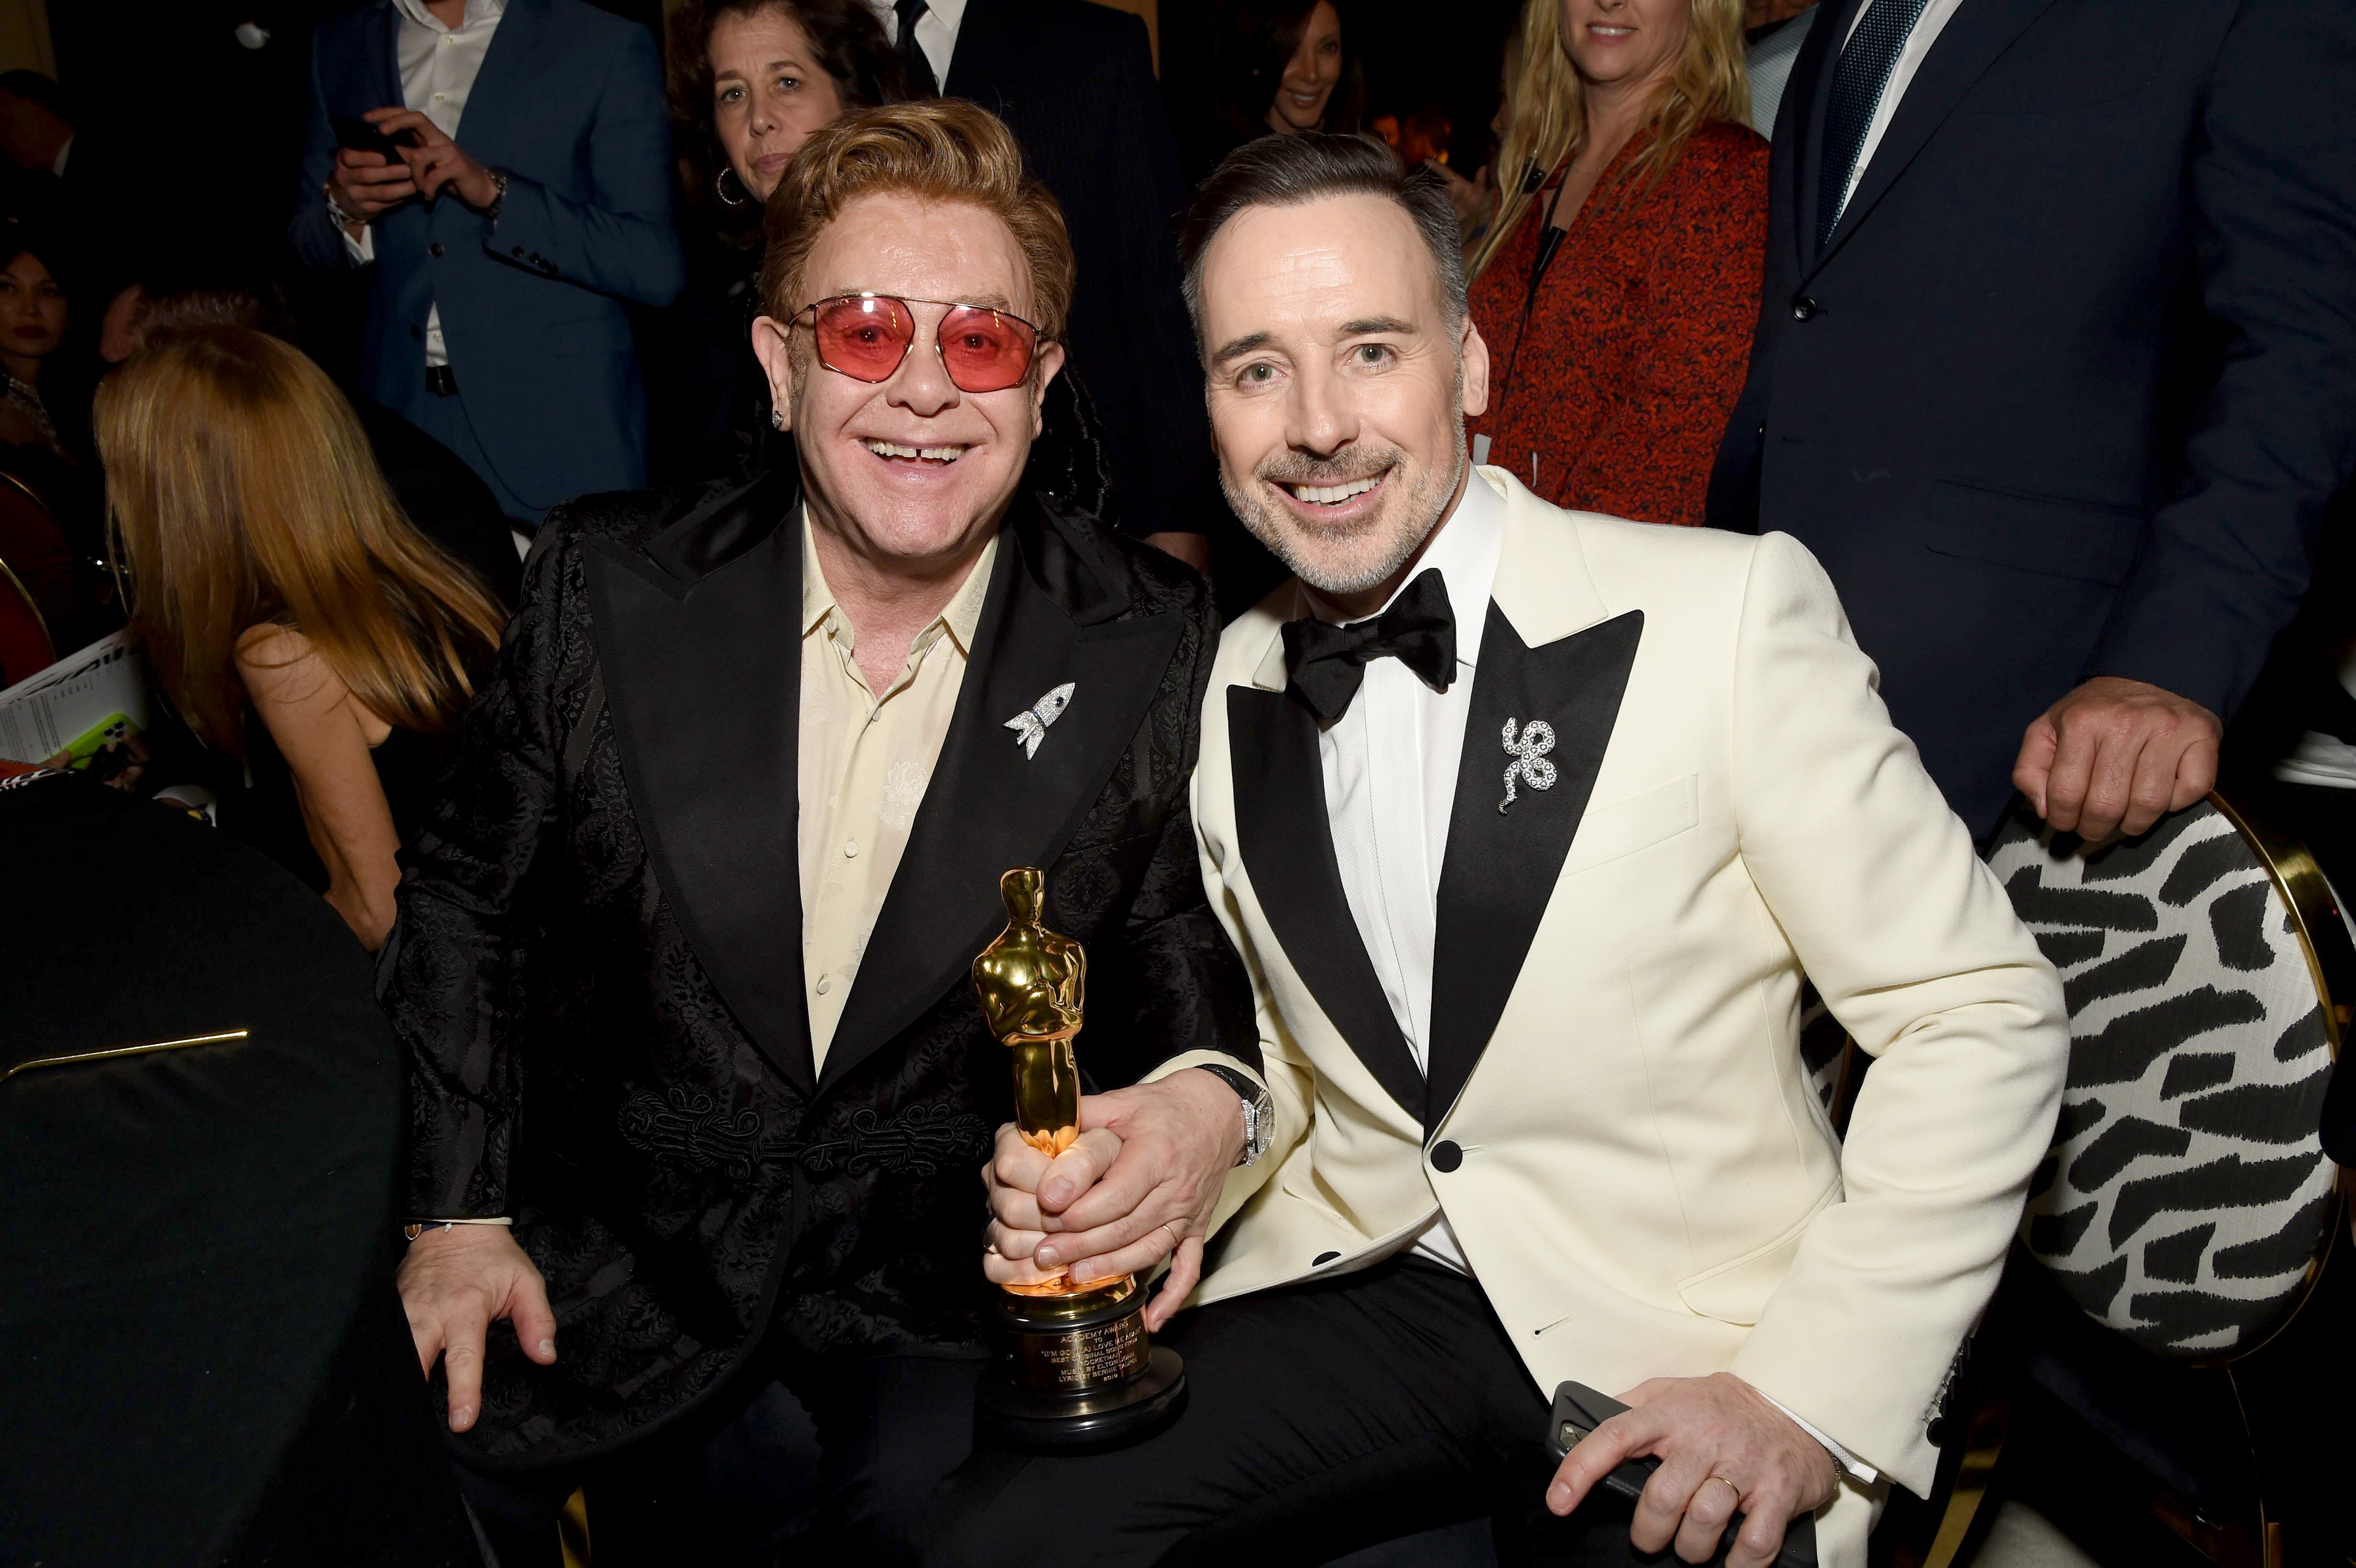 Winner of Academy Award for Best Original Song from "Rocketman" Elton John and David Furnish attend the 28th Annual Elton John AIDS Foundation Academy Awards Viewing Party.